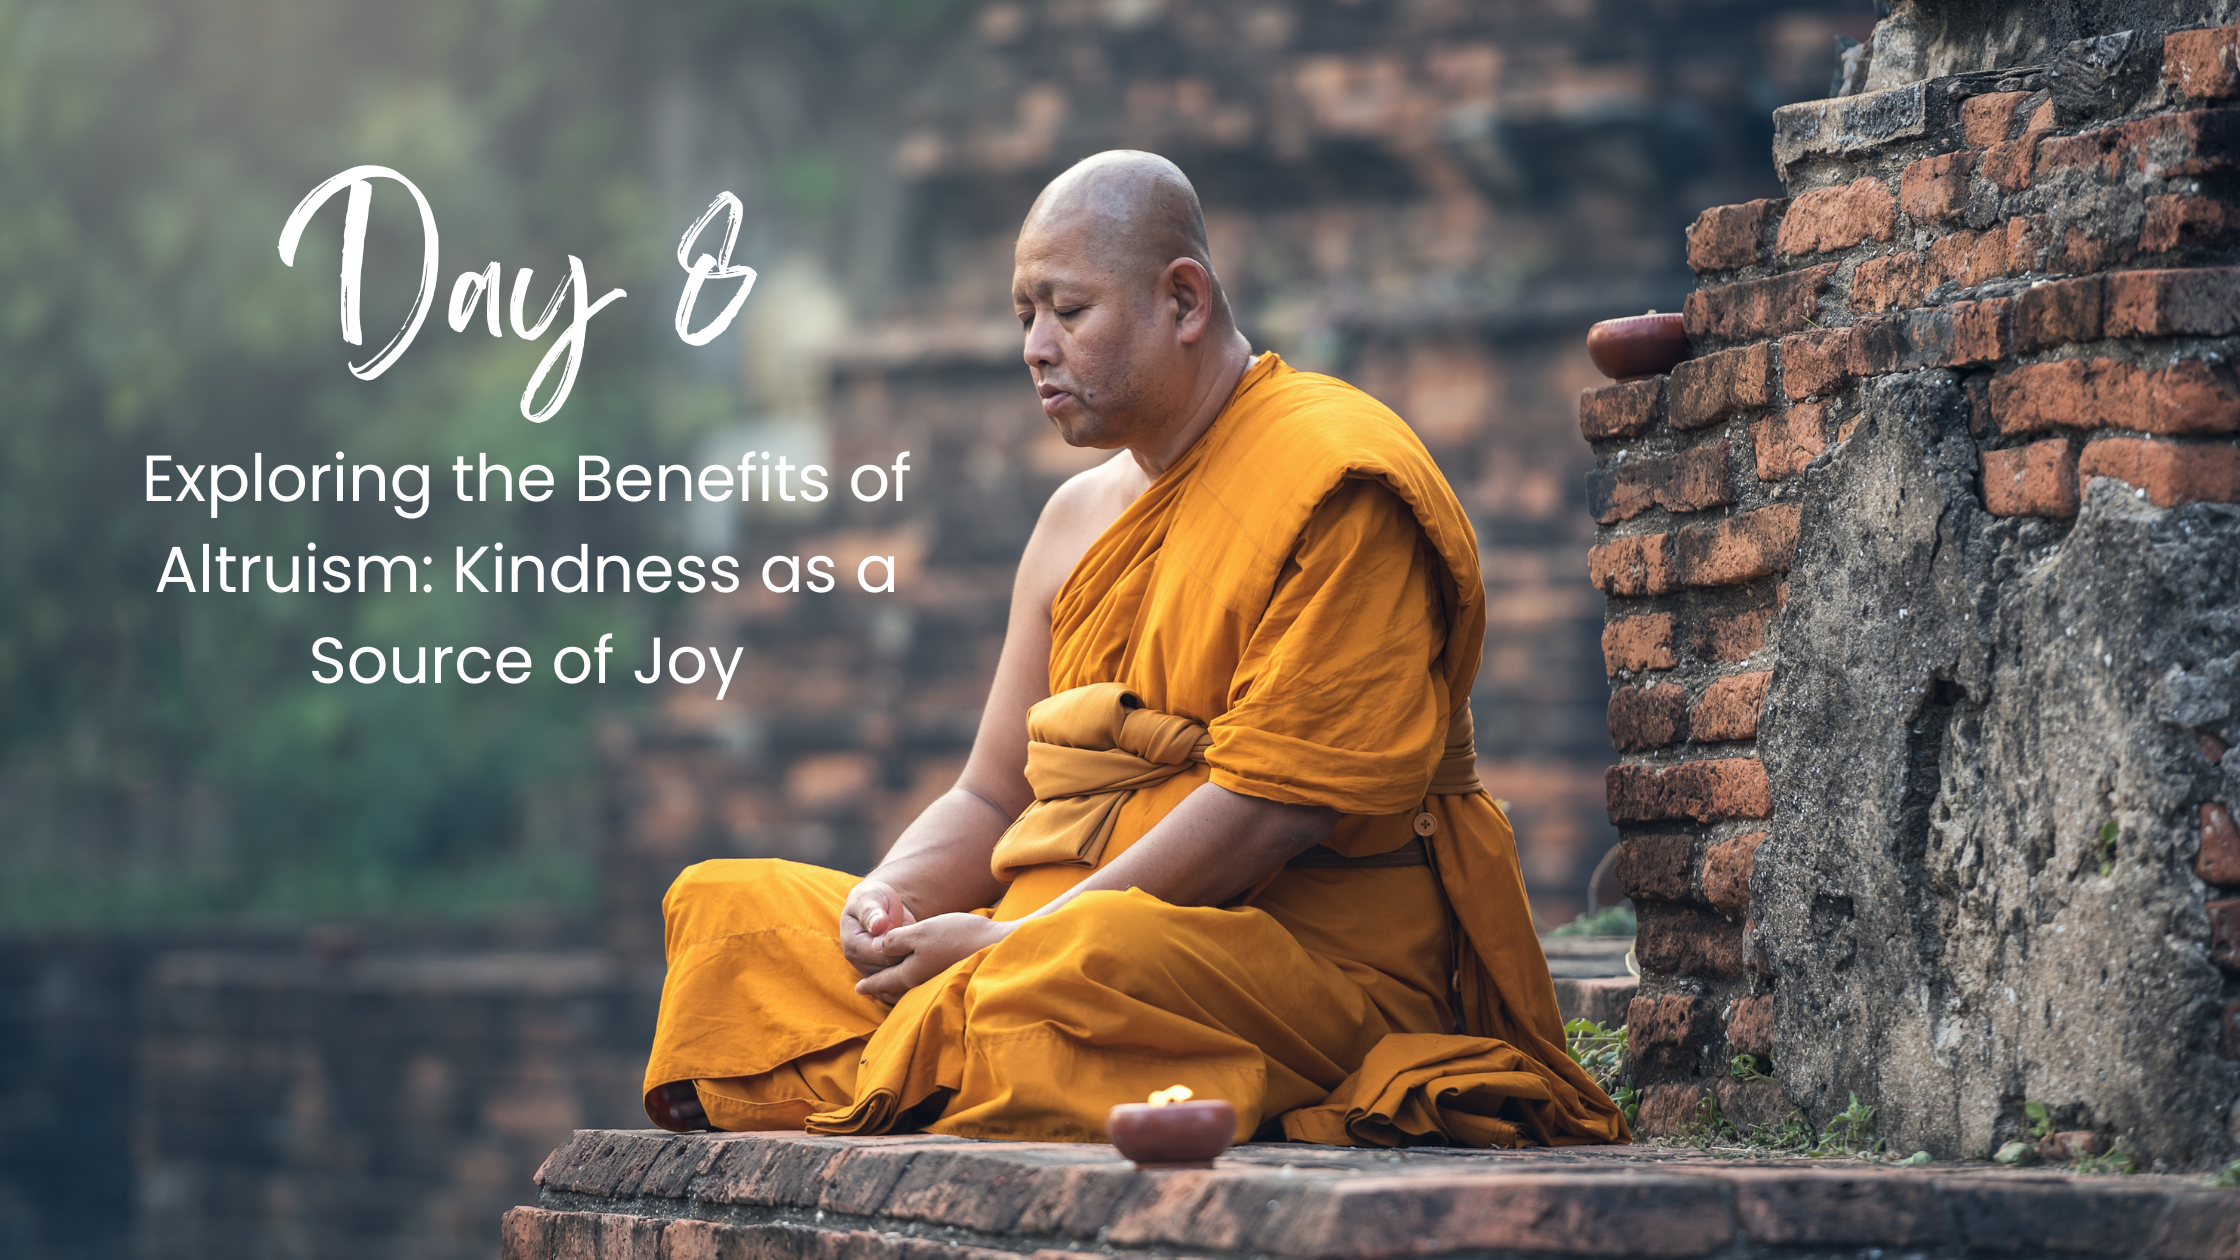 Day 8: Exploring the Benefits of Altruism: Kindness as a Source of Joy